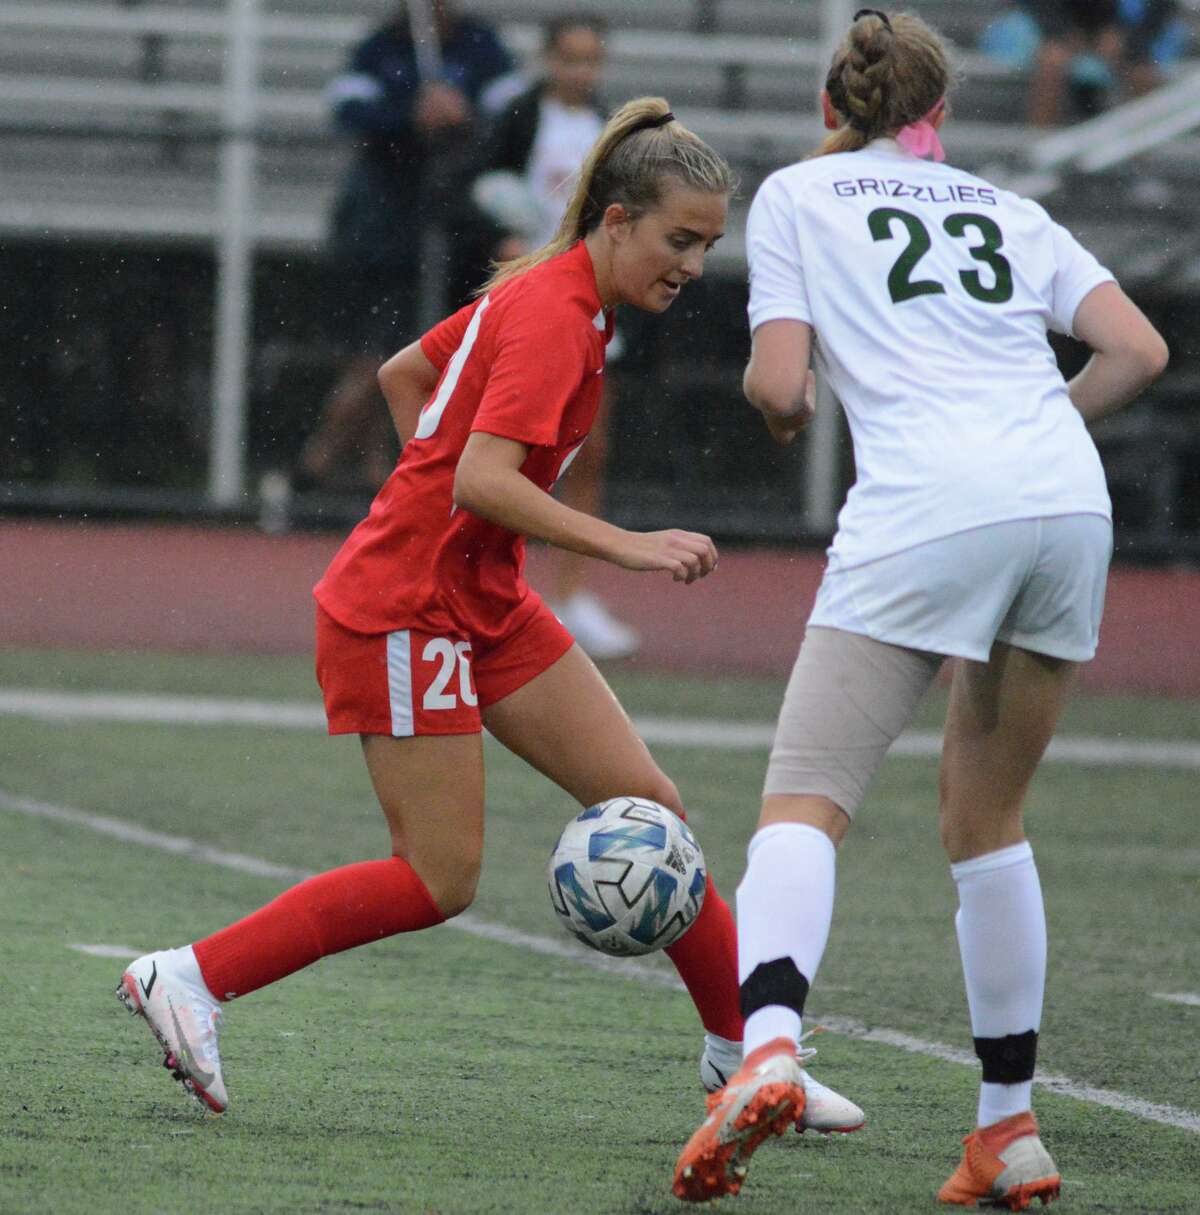 Ariana Geloso of Cheshire controls the ball as she goes past Abby Moore of Guilford on Thursday.